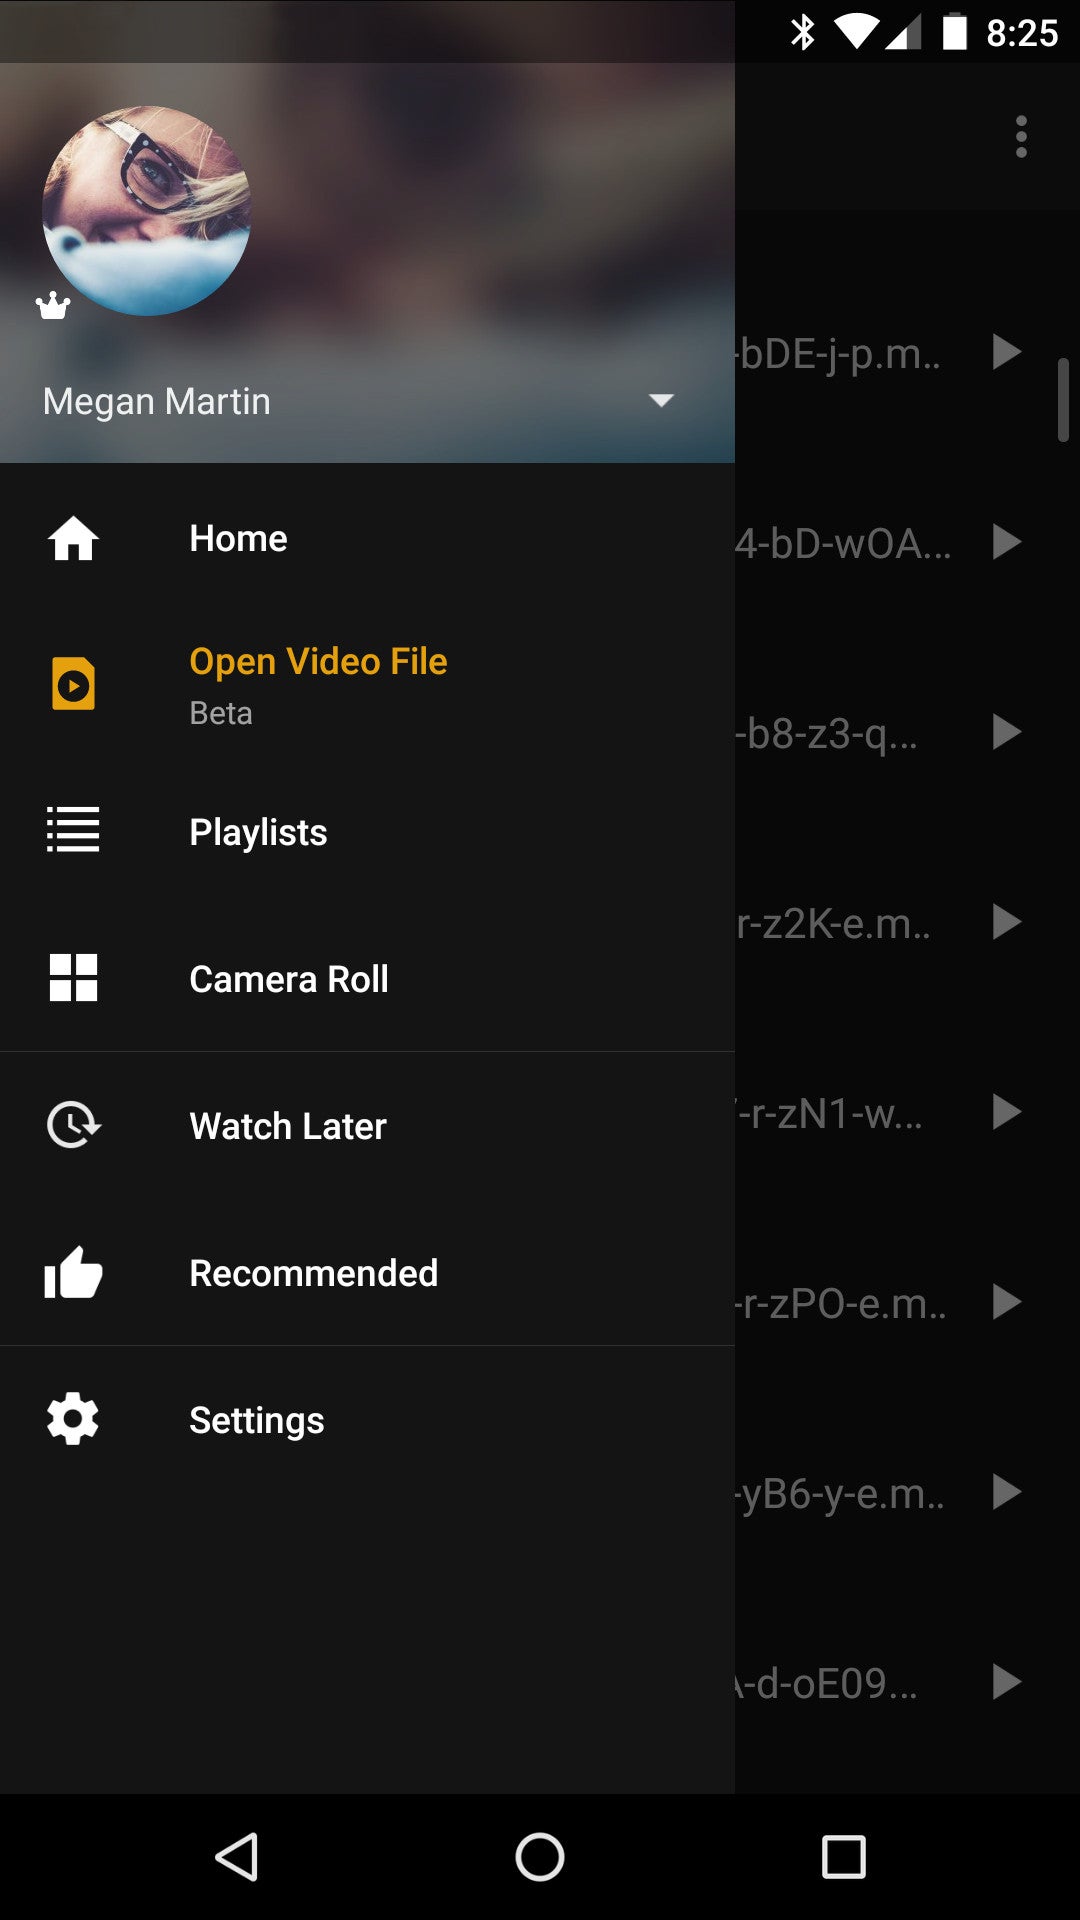 Plex 6.0 makes it possible to play video files stored on your Android phone or tablet